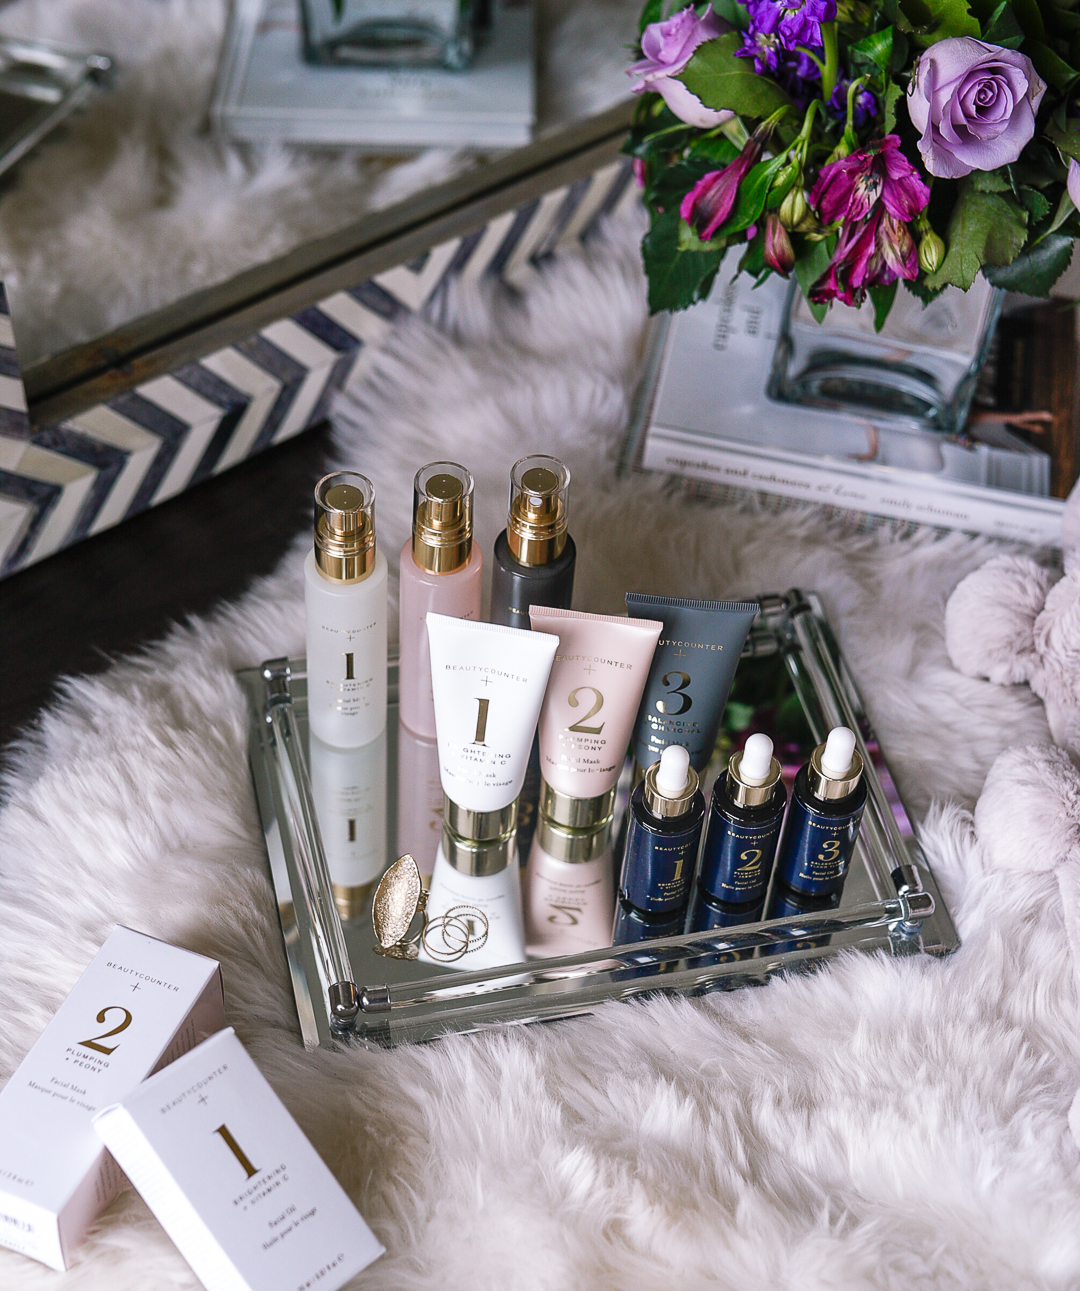 Face mist, face mask, and face oil for healthy, glowing skin. - Why You Should Be Using BeautyCounter Face Oil by Chicago style blogger Visions of Vogue